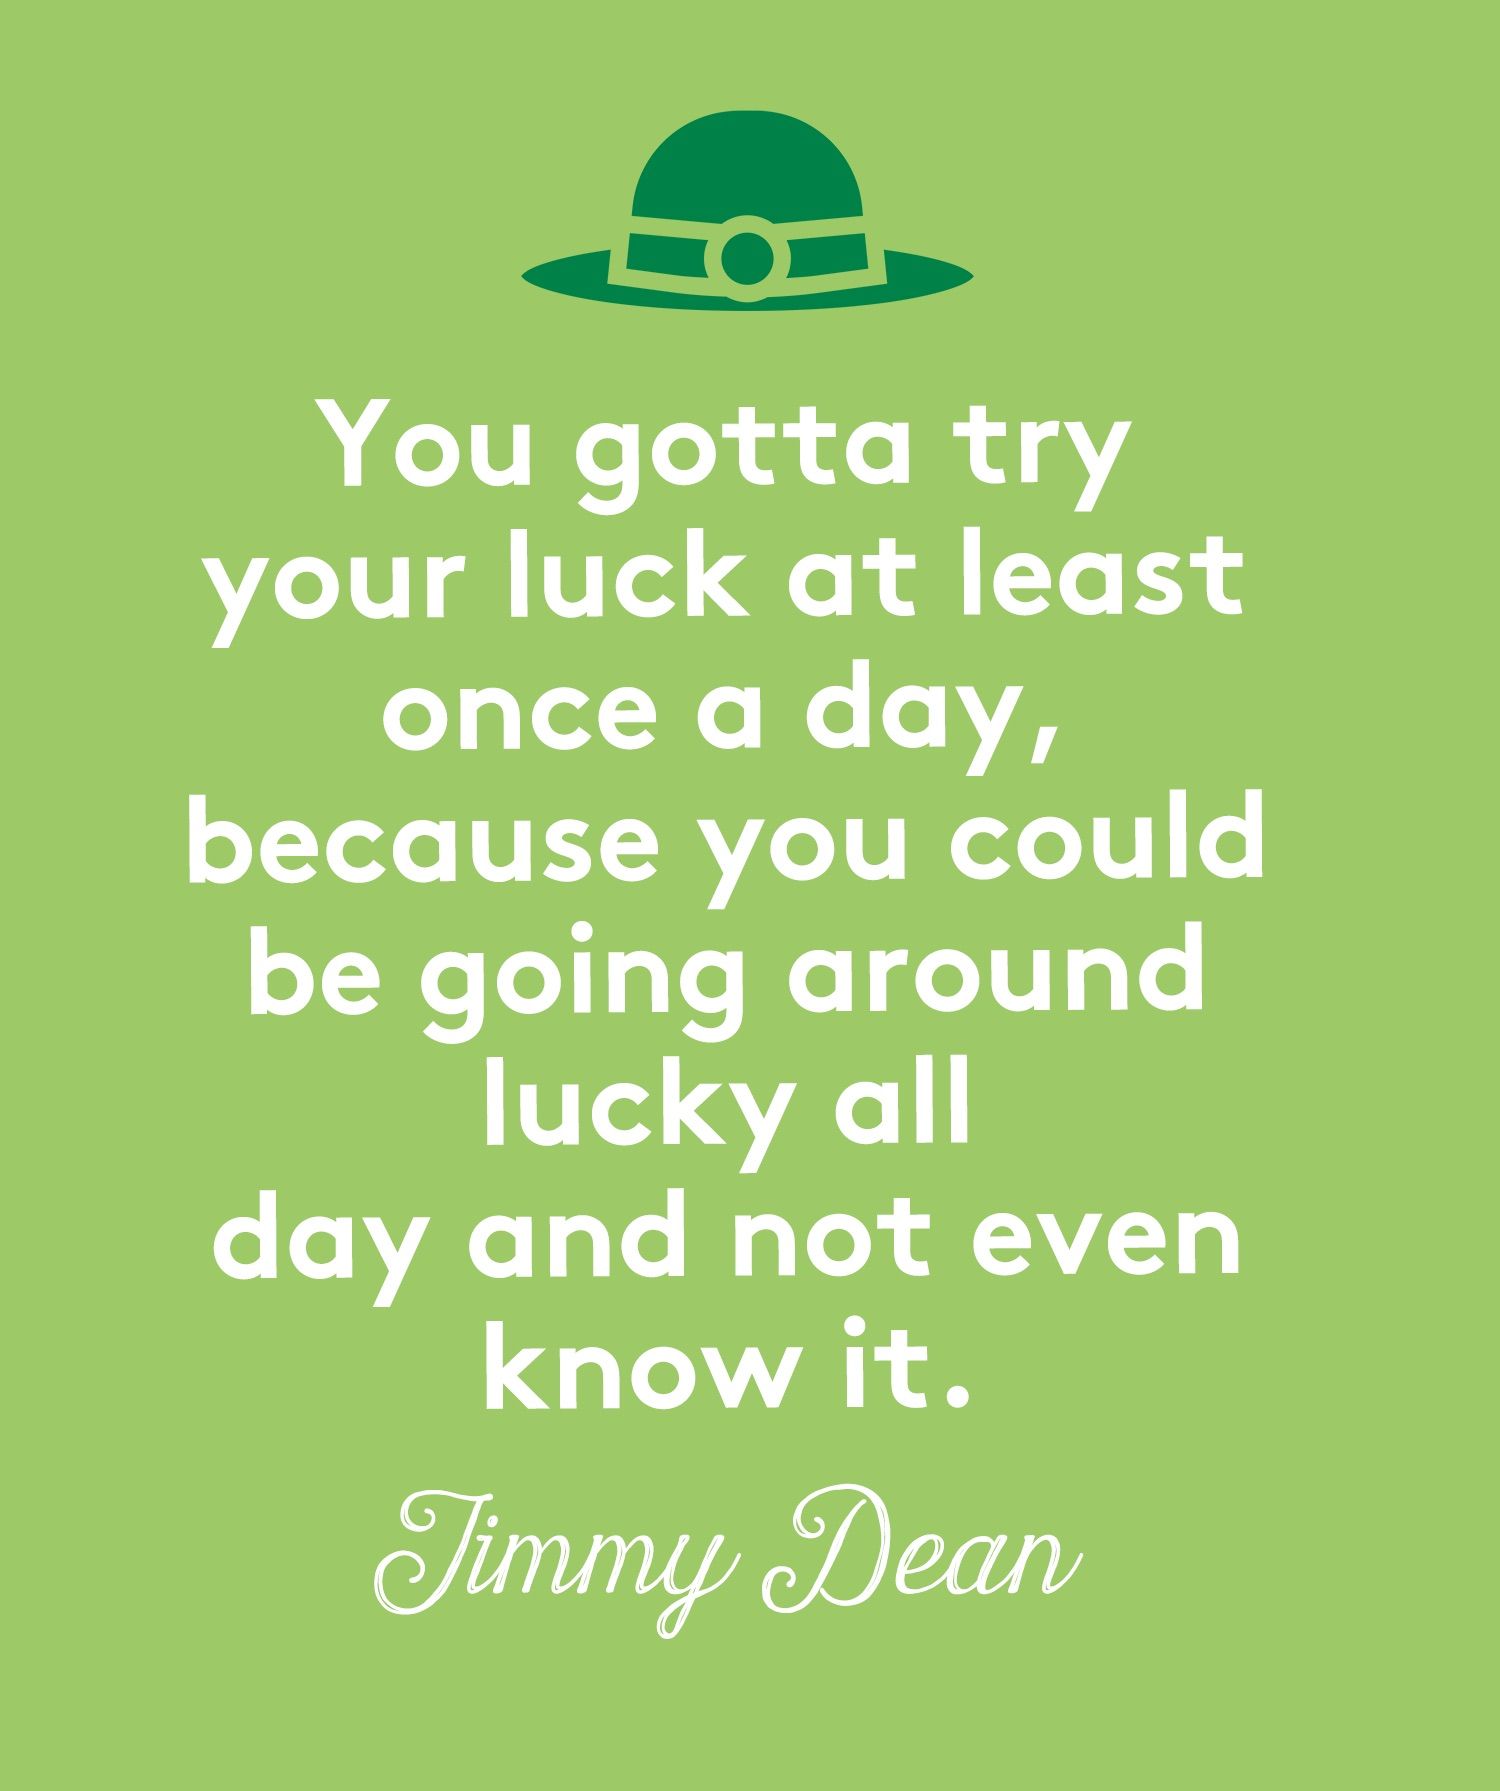 Saint Patrick's Day Quotes #image #wallpaper #sayings in 2020